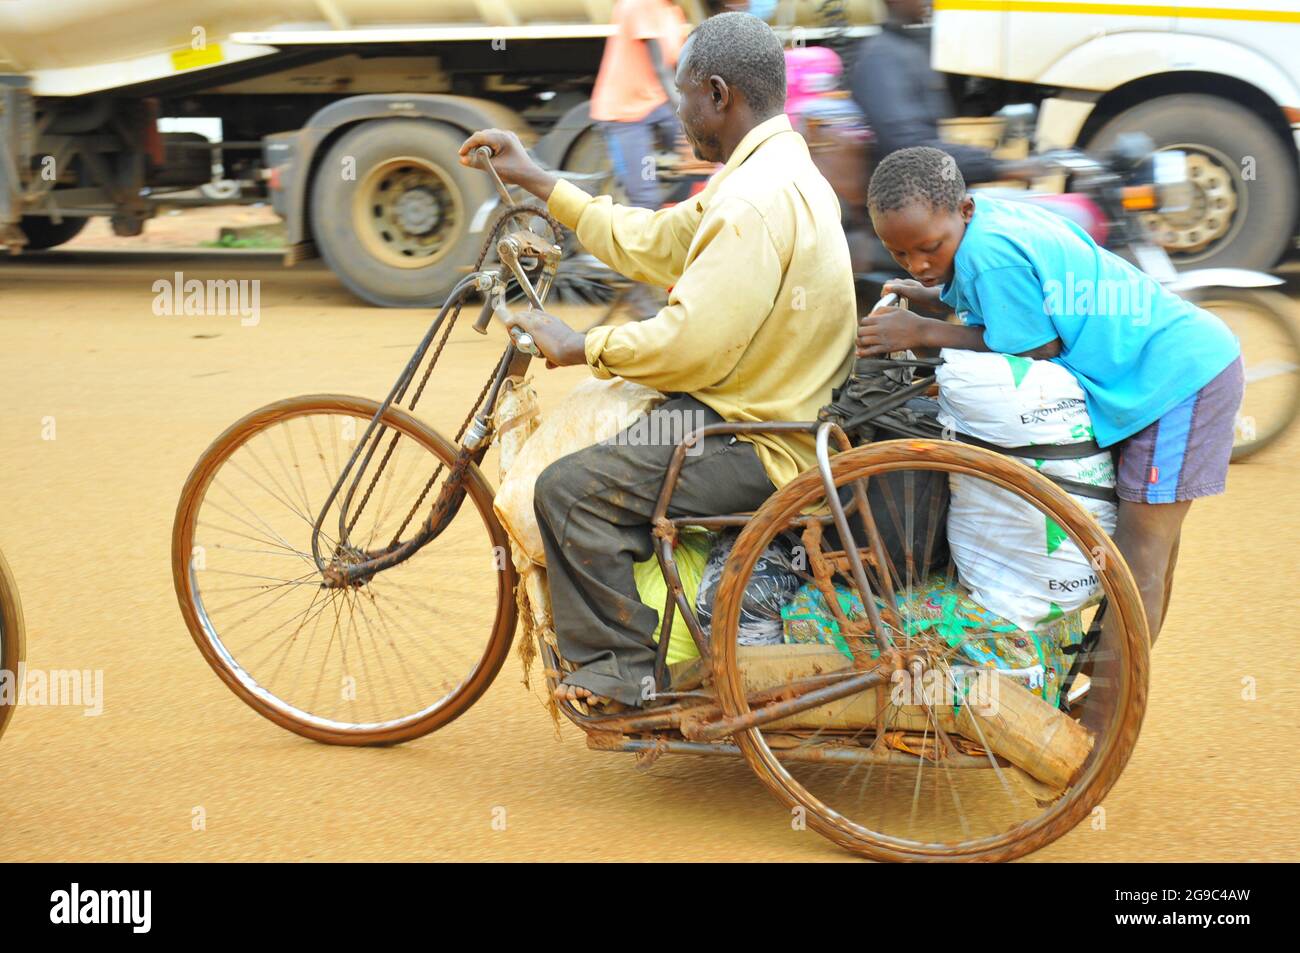 A man with a disability ridding a special designed wheel chair which his child. The wheel chair is designed for transporting goods bought to Uganda from Kenya. The artisans came up with these designs to allow people with disability free movement and for daily living. Because of these specially designed wheel chairs people with disabilities can enjoy some of the same rights like other people. Uganda. Stock Photo